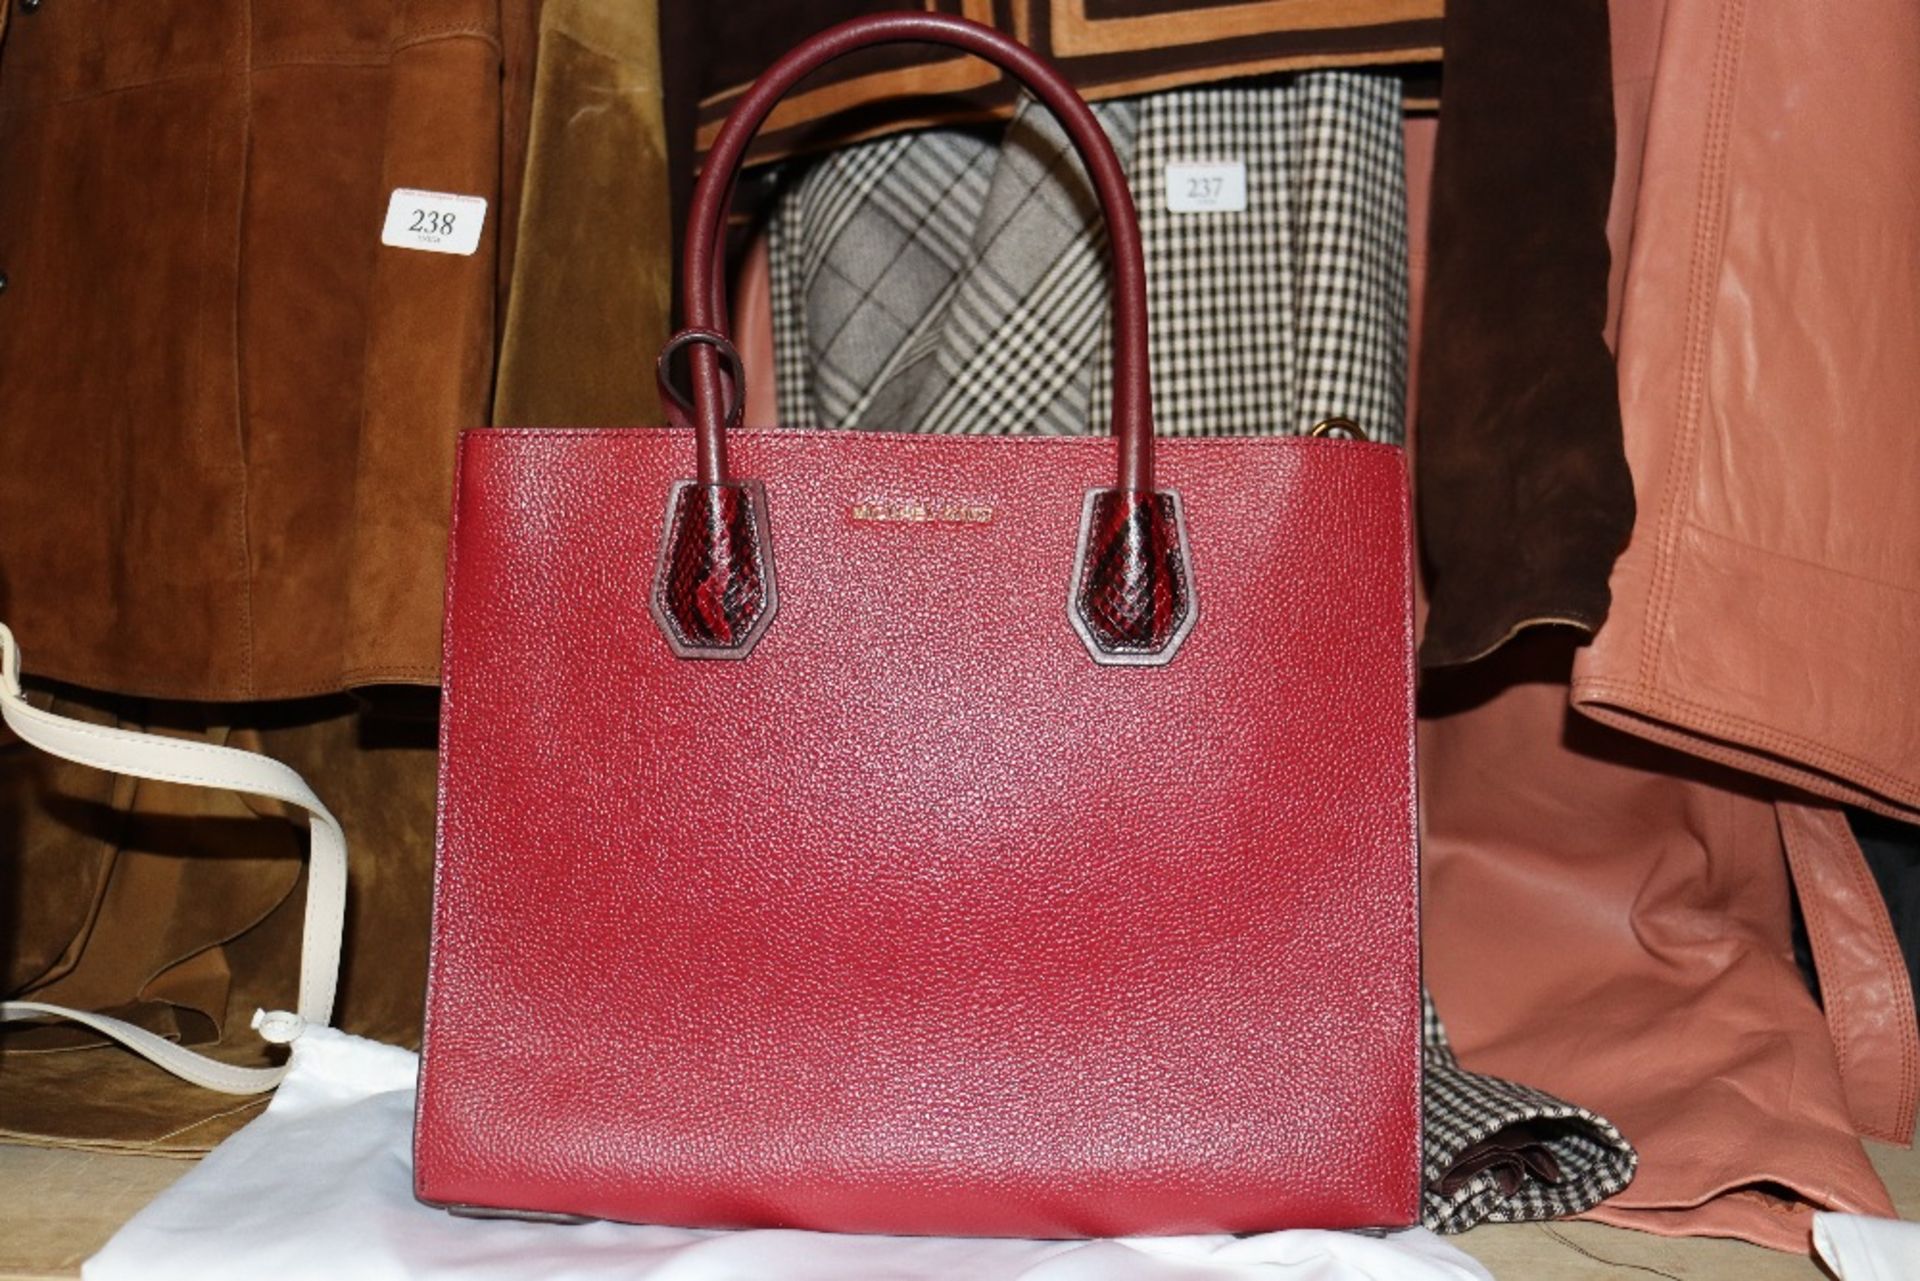 A Michael Kors wine coloured bag and purse - Image 2 of 6